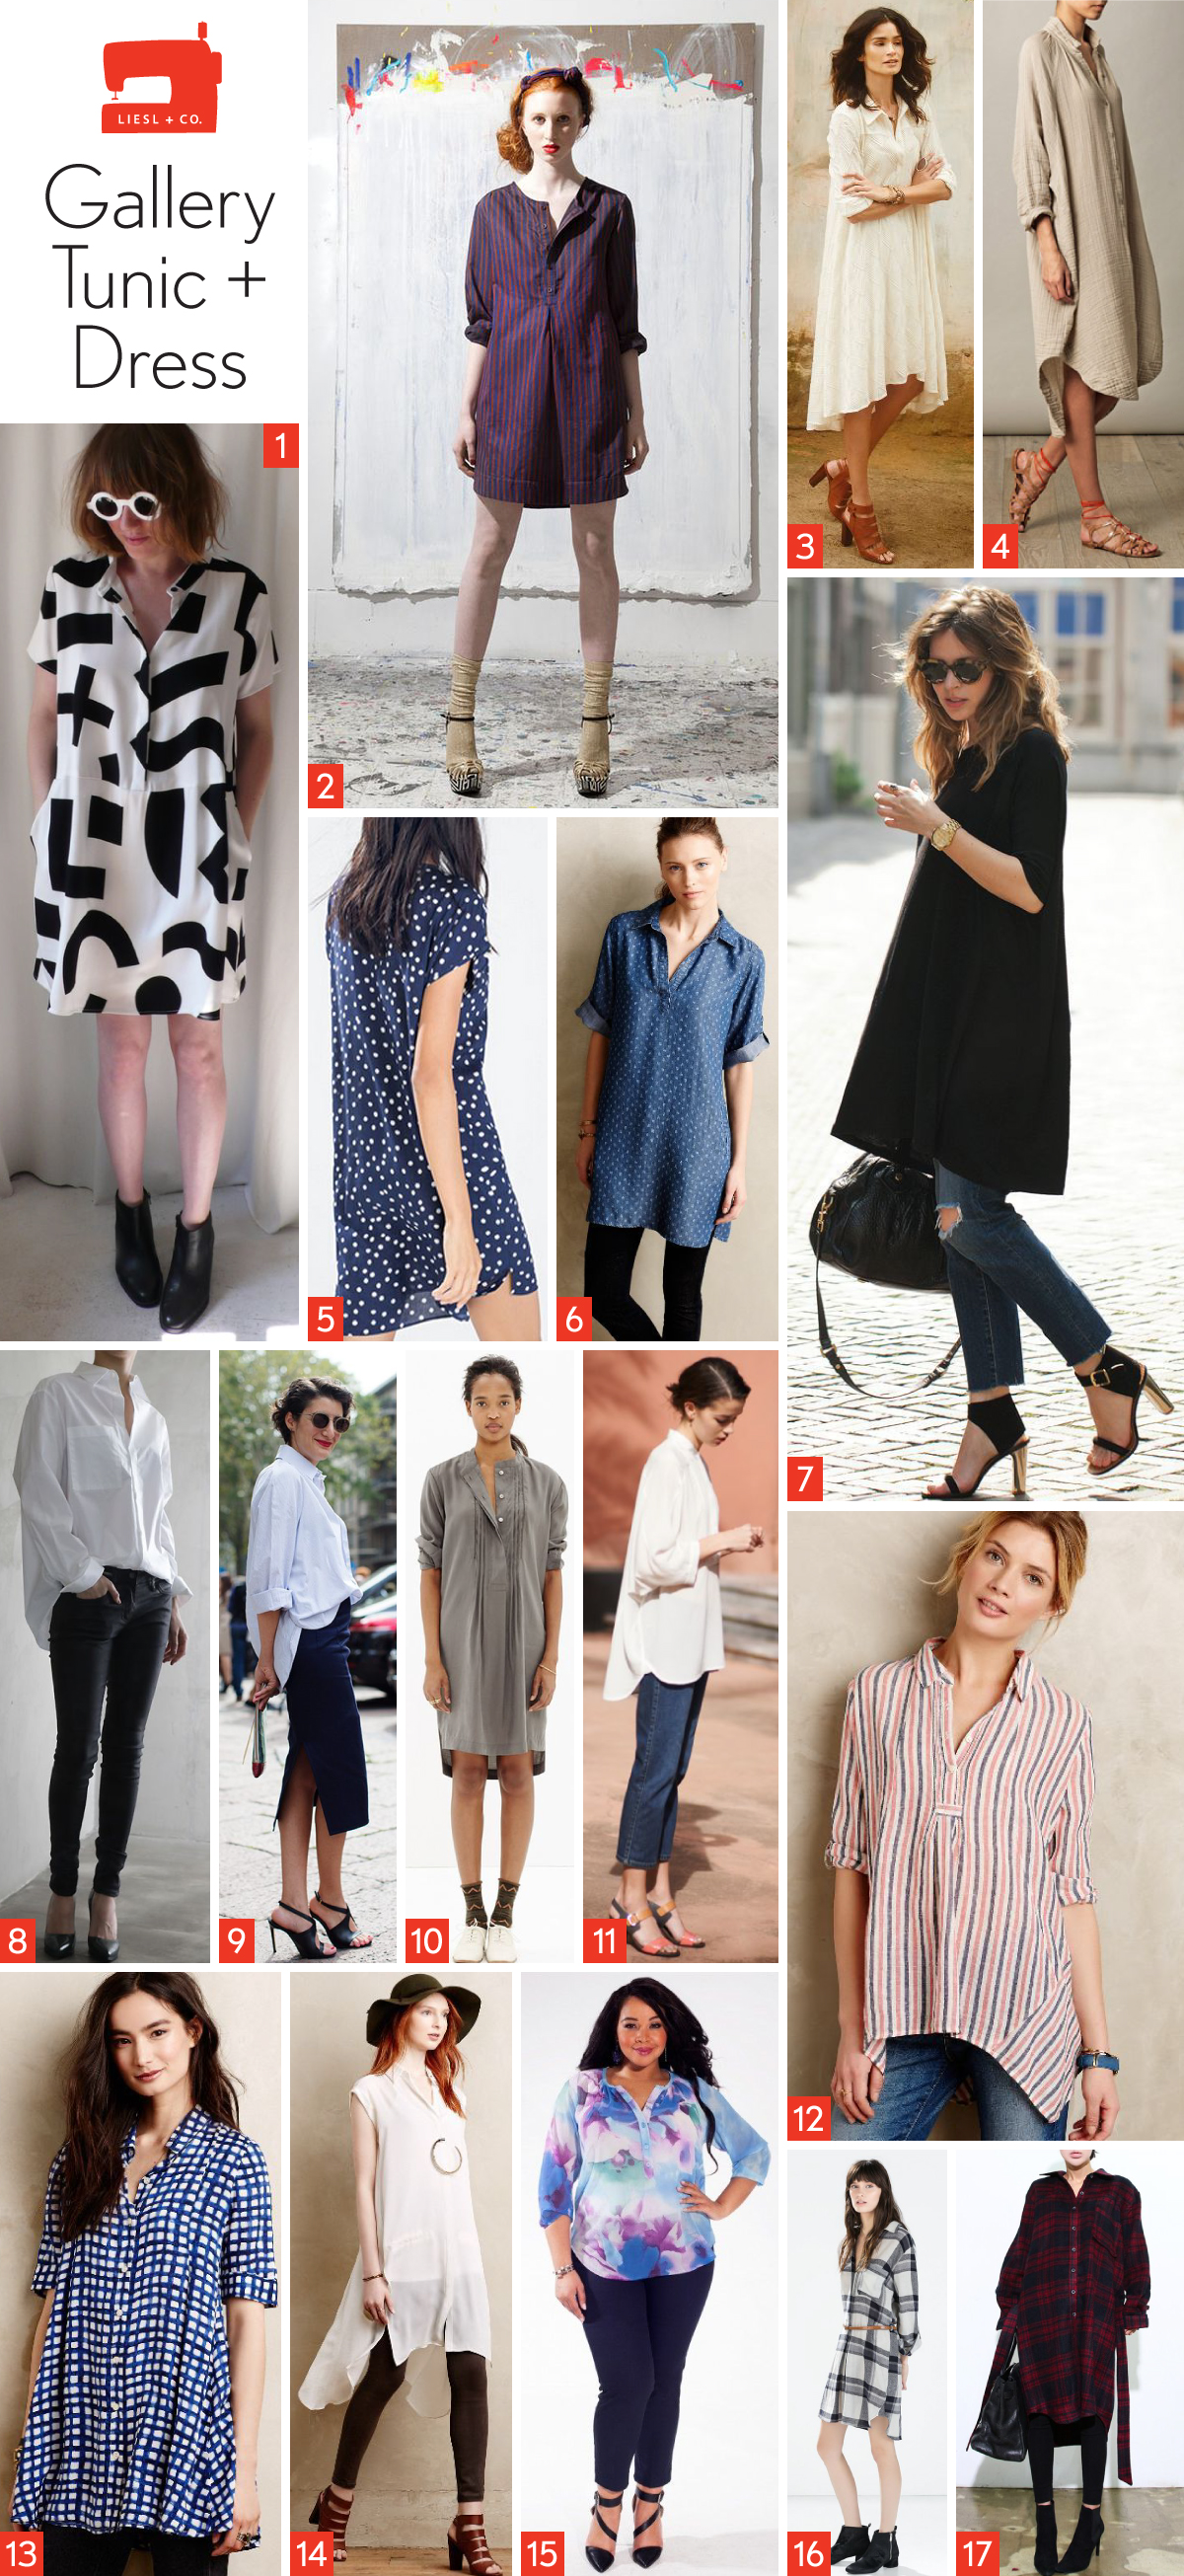 Is It a Dress? A Shirt? How The Heck To Style Tunics